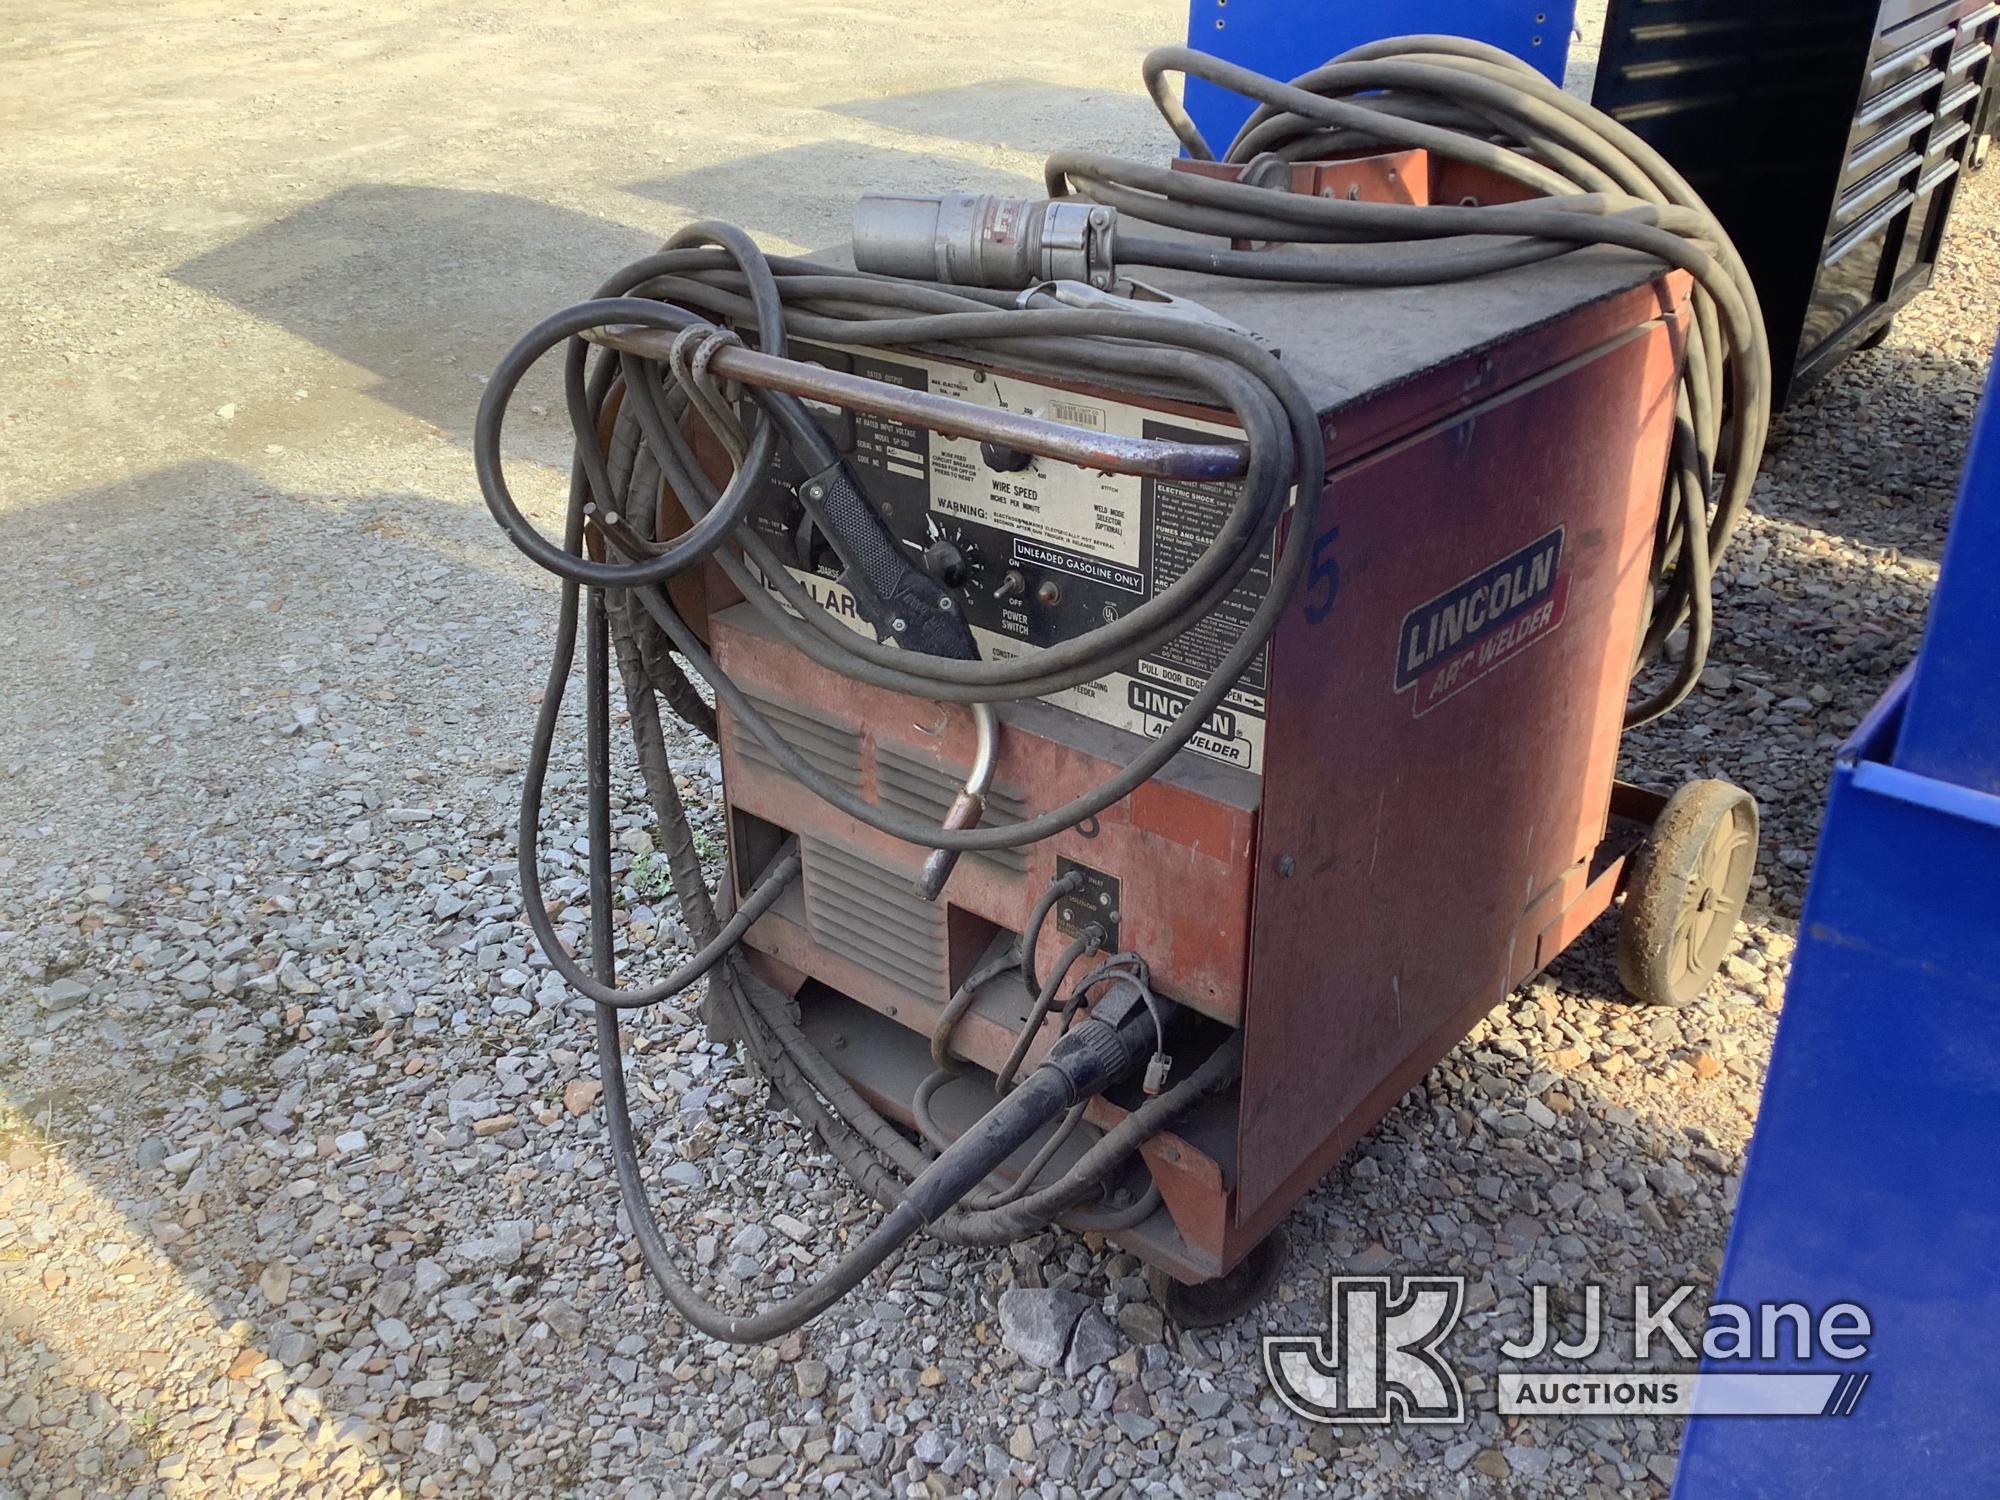 (Smock, PA) Lincoln Arc Welder Condition Unknown